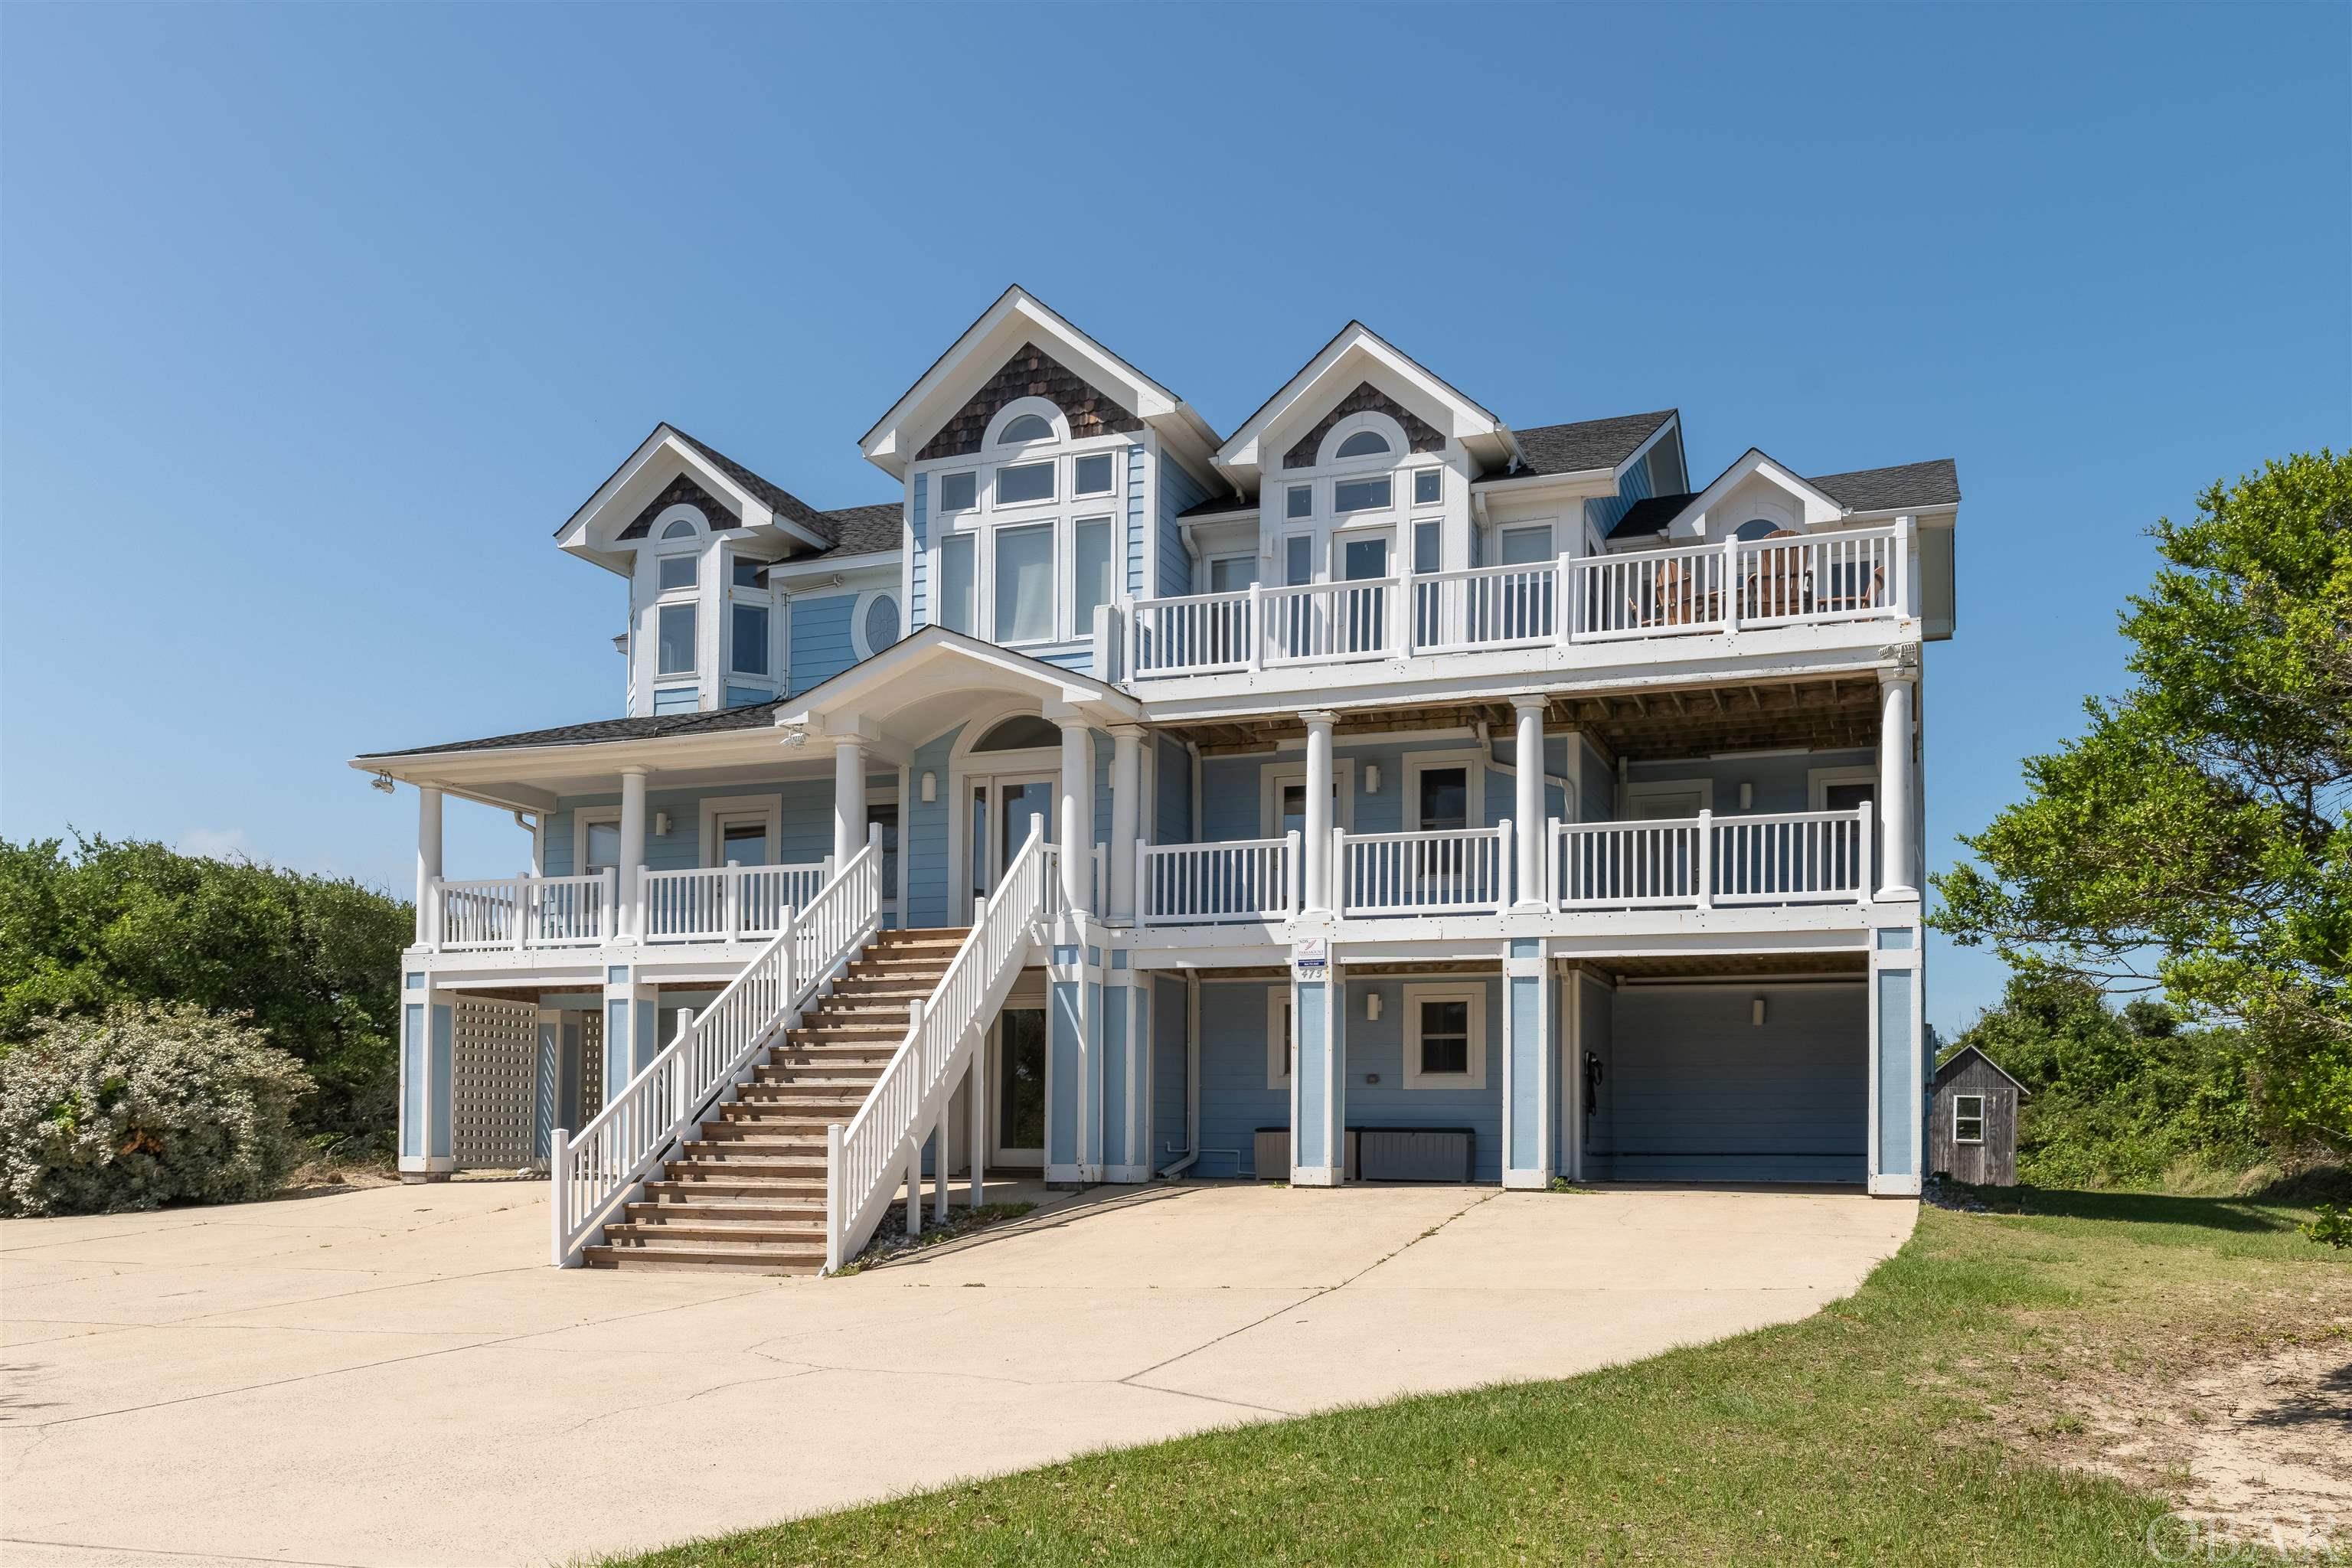 Outstanding location on nearly one acre with panoramic ocean views and 8 suites!  Fully handicap accessible with handicap friendly bedroom on the mid-level complete with roll in shower.  Only 3 lots back from the beach!  A very short stroll to uncrowded beaches, private pool, hot tub, game room with exercise area & kitchenette, mid level media room, top level master bedroom with fireplace & jetted tub, elevator, large and open great room featuring cathedral ceilings with lots of windows to enjoy the outstanding ocean views, tiled entry foyer, amazing kitchen with 2 of each appliance, hardwood floors, spacious bedrooms, mid level media/family room, ground level recreation room, gated community, subdivision tennis courts, close to shops, restaurants & the Currituck Club Golf course.  It simply doesn't get any better!  Lots of recent improvements.......New roof in 2020, new ground level HVAC 2020, New top level HVAC 2019, mid level HVAC replaced in 2012.  New vinyl handrails on decks in late 2020.  New pool fence late 2020.  New front stairs with vinyl handrails early 2021.  All north facing siding on house was replaced and painted in late 2020.  New living room sectional sofa late 2020.  New dining table in late 2020.  New furniture in mid level family room late 2020. All new window treatments 2022. New pool heather and saltwater system 2022.  New Charge Point Cart Charger 2022. High end and durable, composite pool furniture.